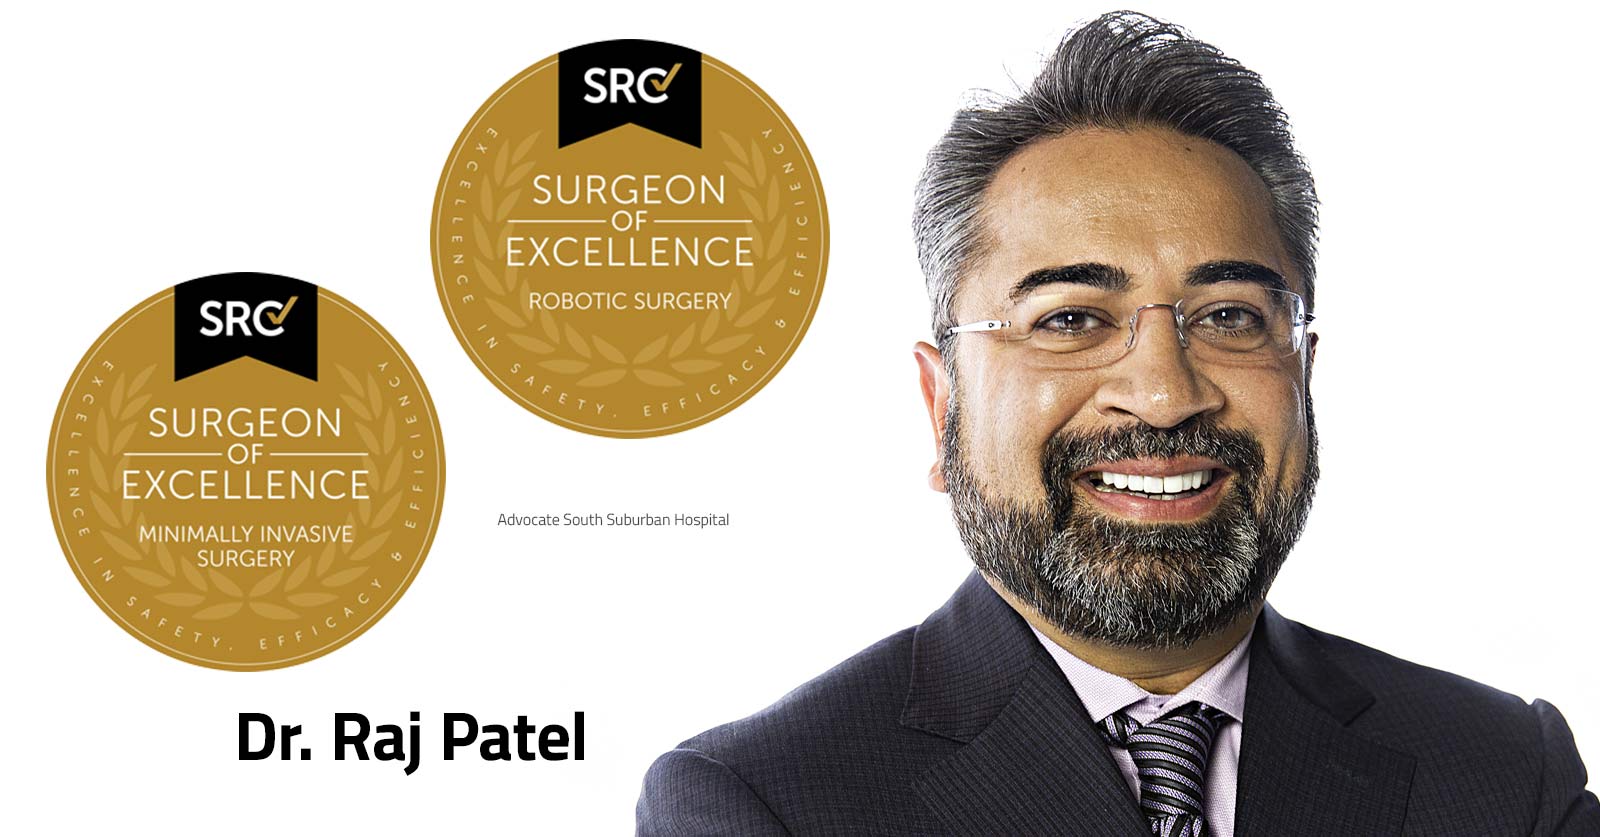 Surgeon of Excellence - Rajesh Patel, MD